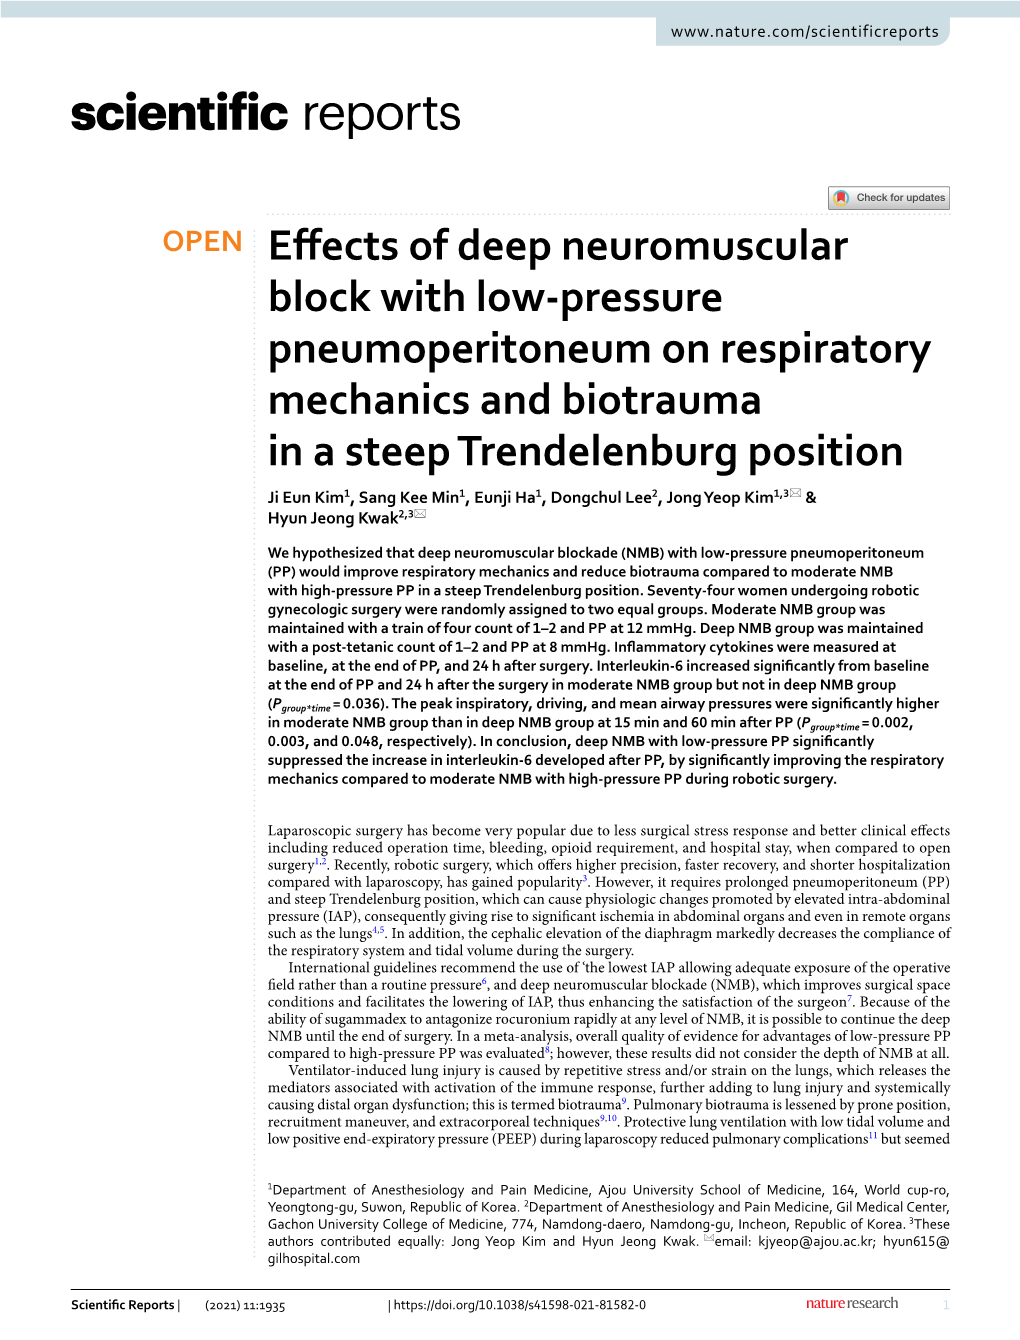 Effects of Deep Neuromuscular Block with Low-Pressure